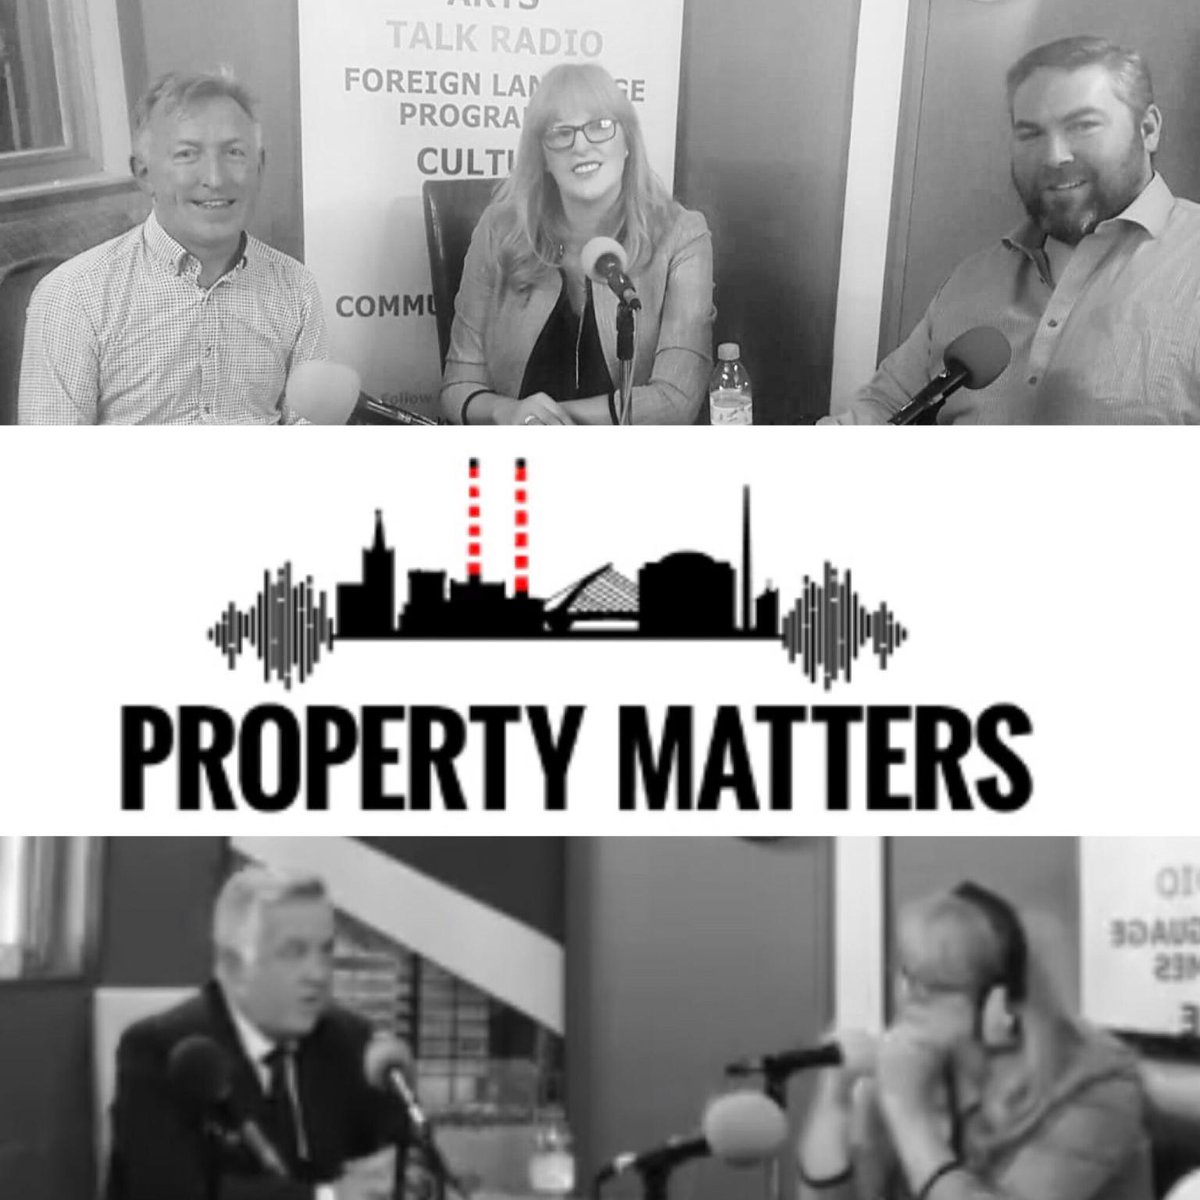 Our MD Arthur O'Brien joined @CarolTallon on #propertymatters to discuss the local planning process, public consultation and the role of An Bord Pleanala for fast-track applications. Listen back to the interview here. 

#planning #propertydublin

open.spotify.com/episode/2lWglO…